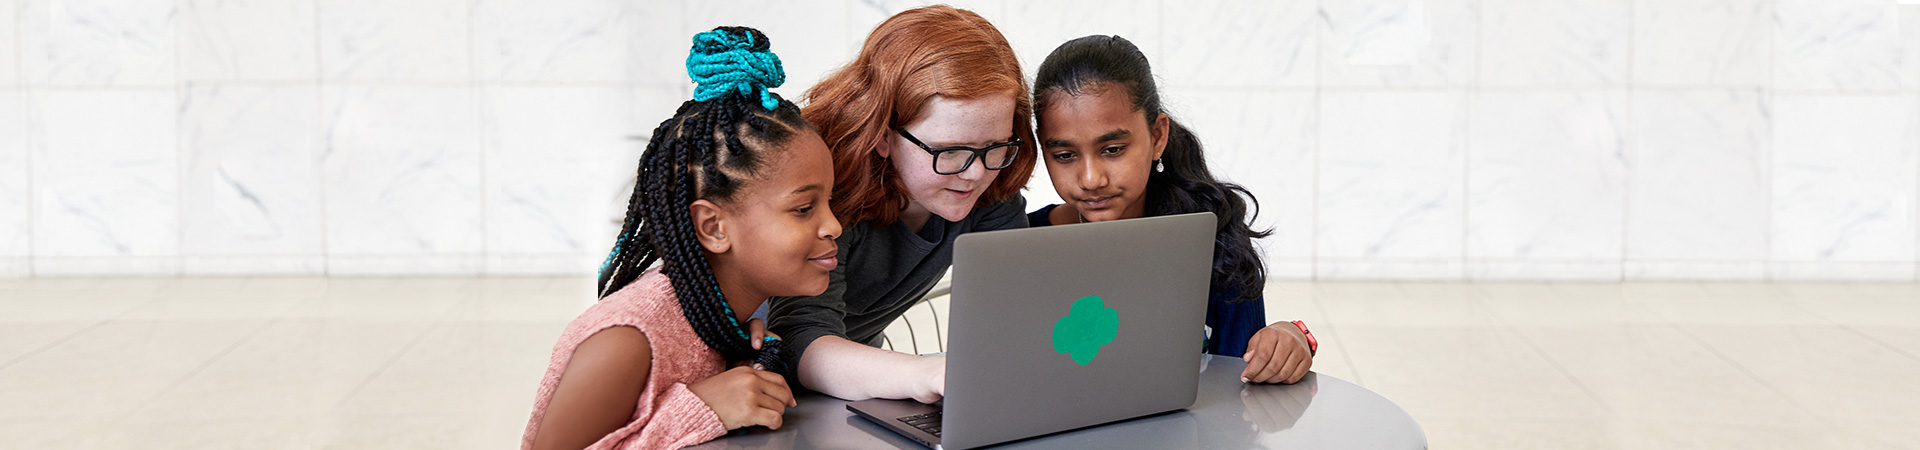  Three Girl Scouts gathered around a laptop 